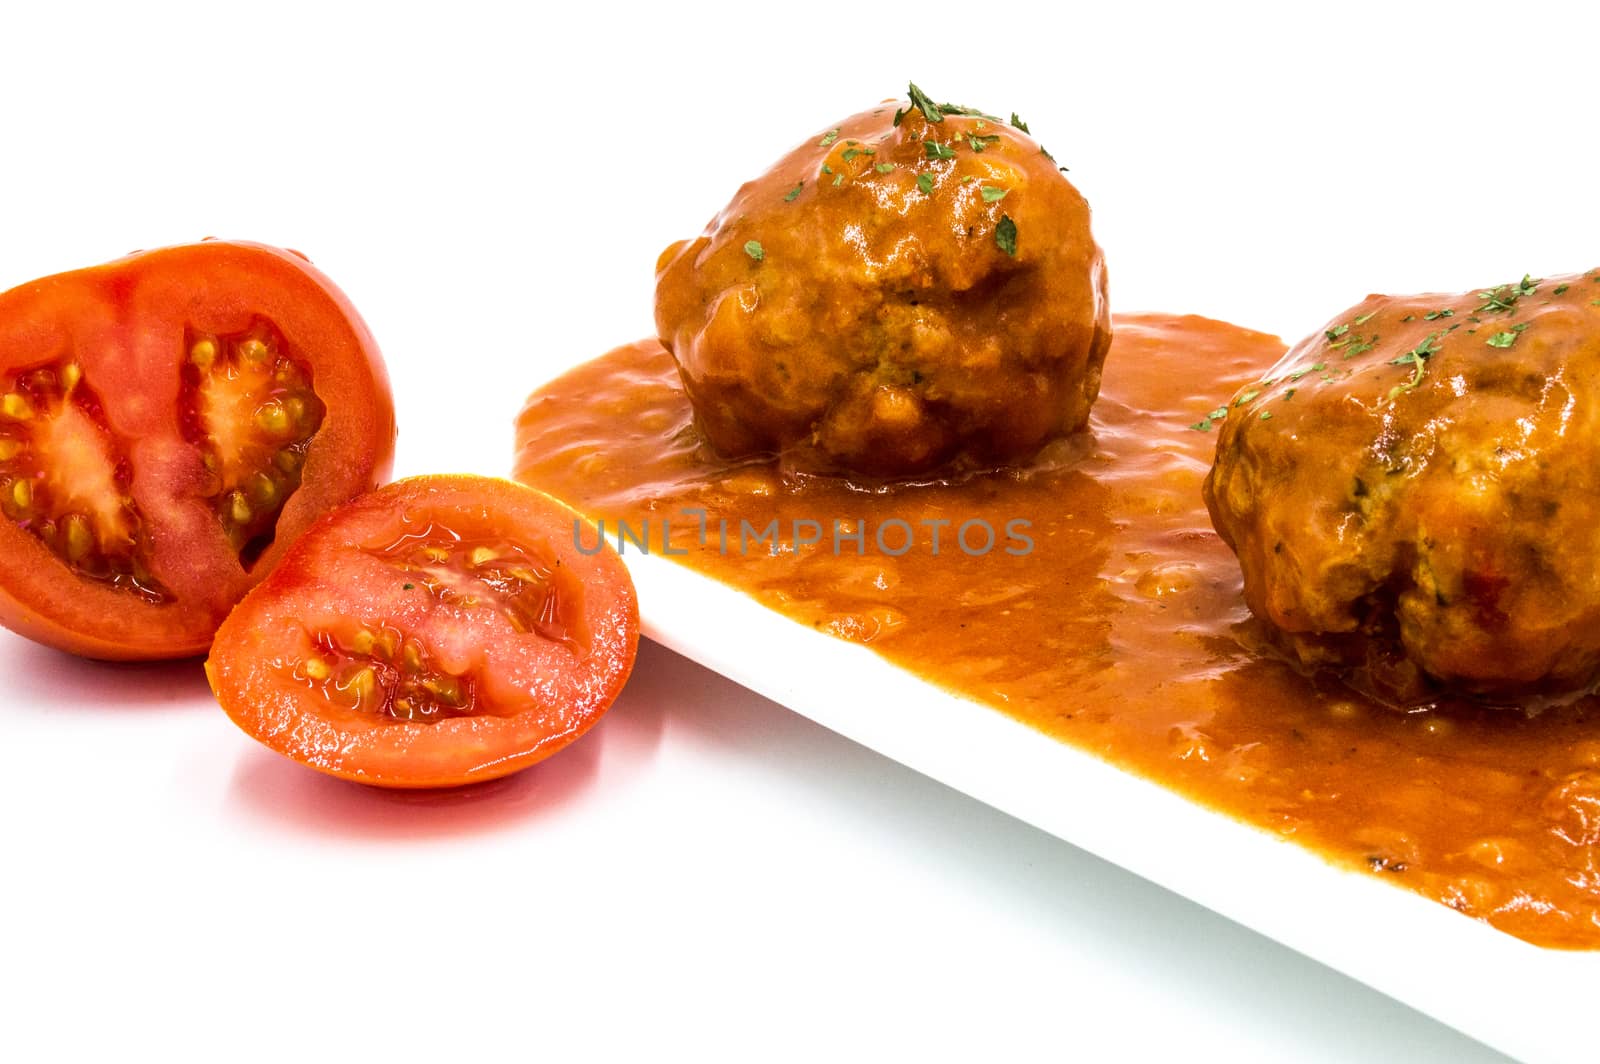 Meatballs cooked in tomato sauce  by Philou1000